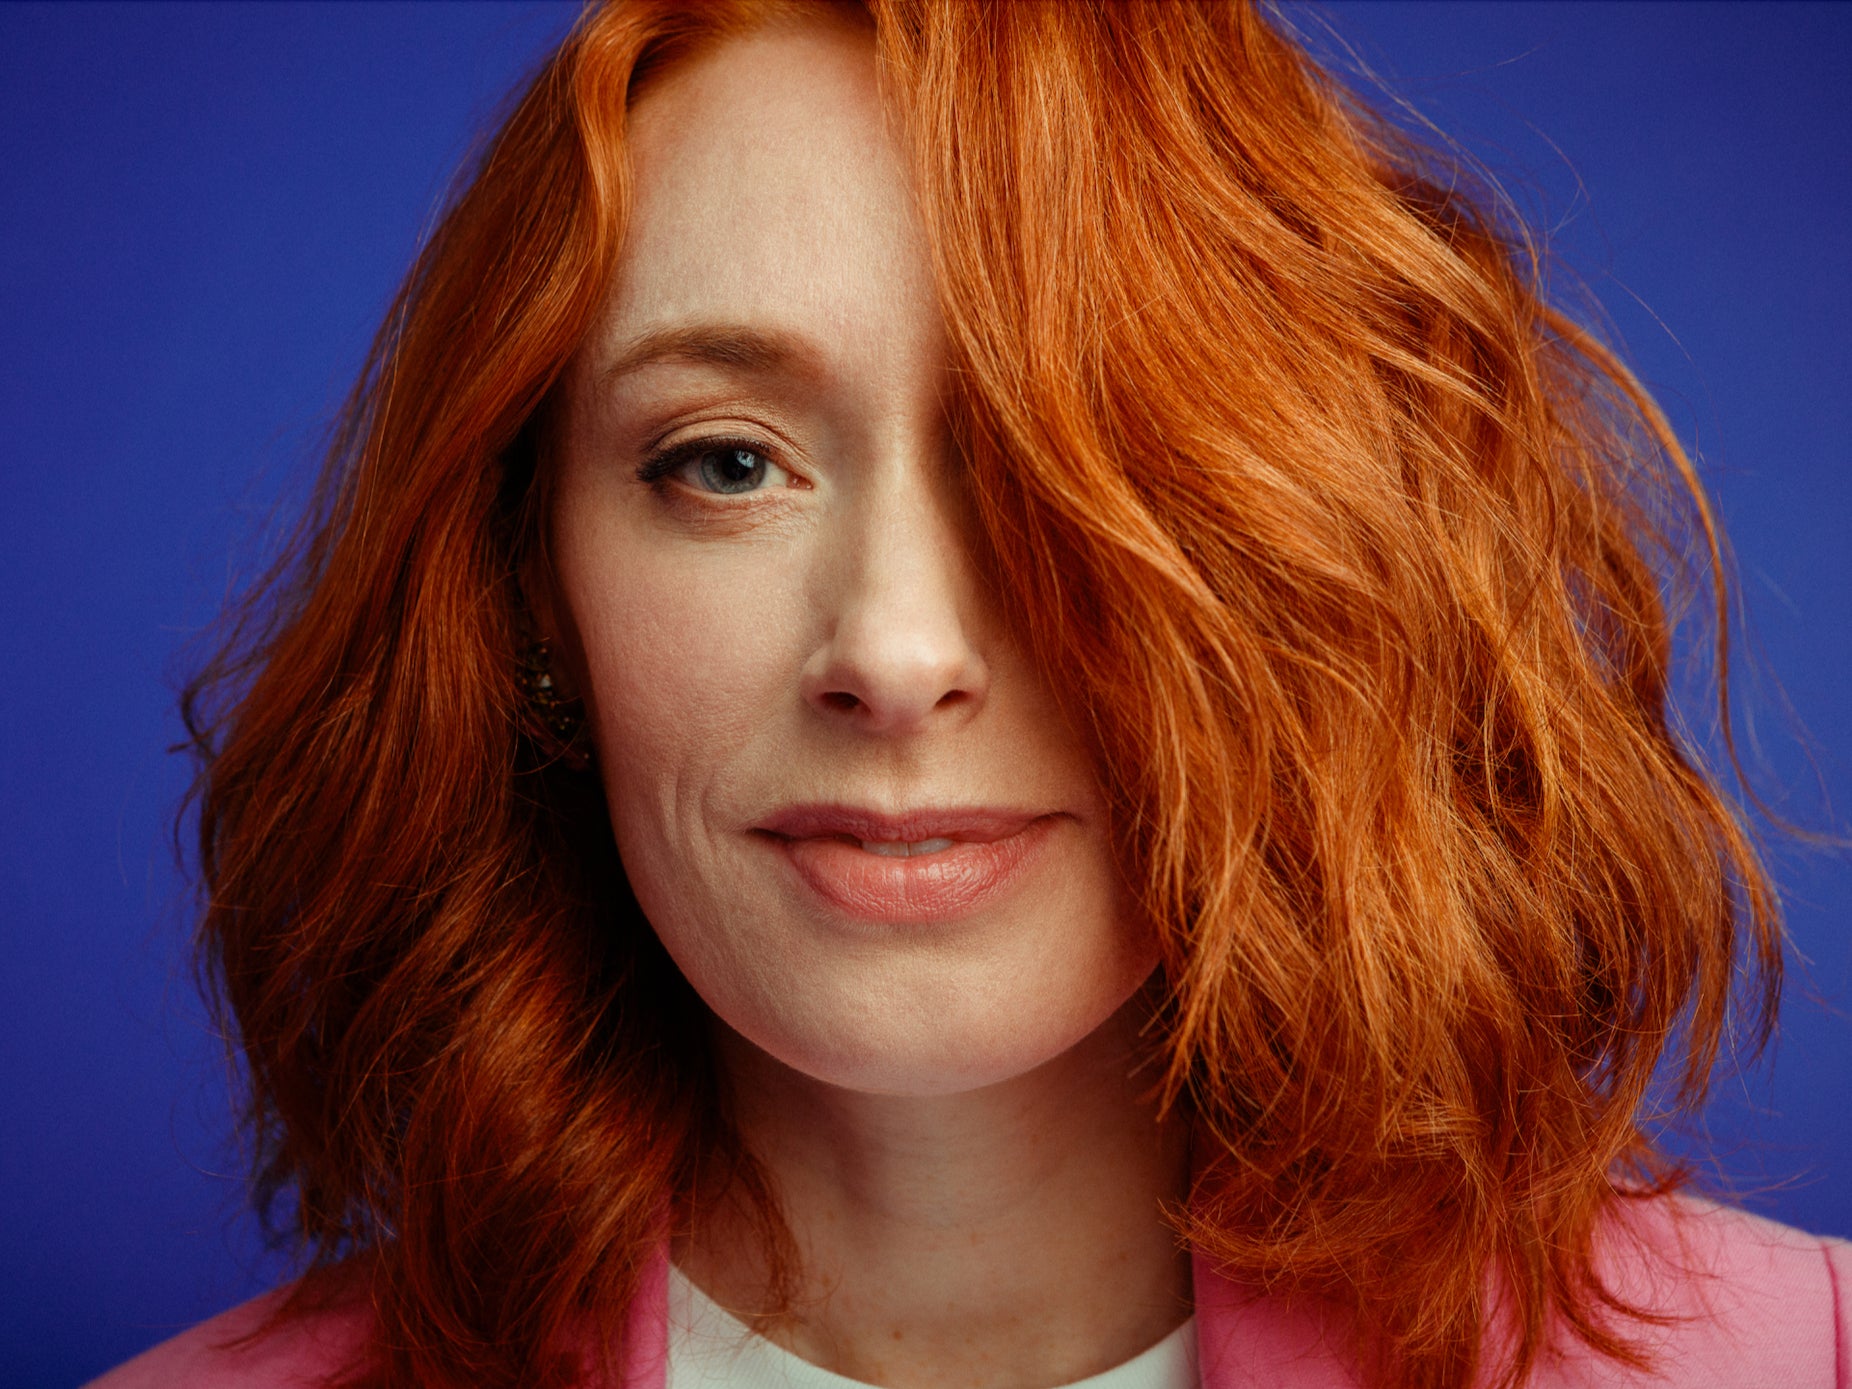 Mathematics of Love author Hannah Fry When you have cancer, youre just like, “Get it out of me, Im terrified” The Independent image photo